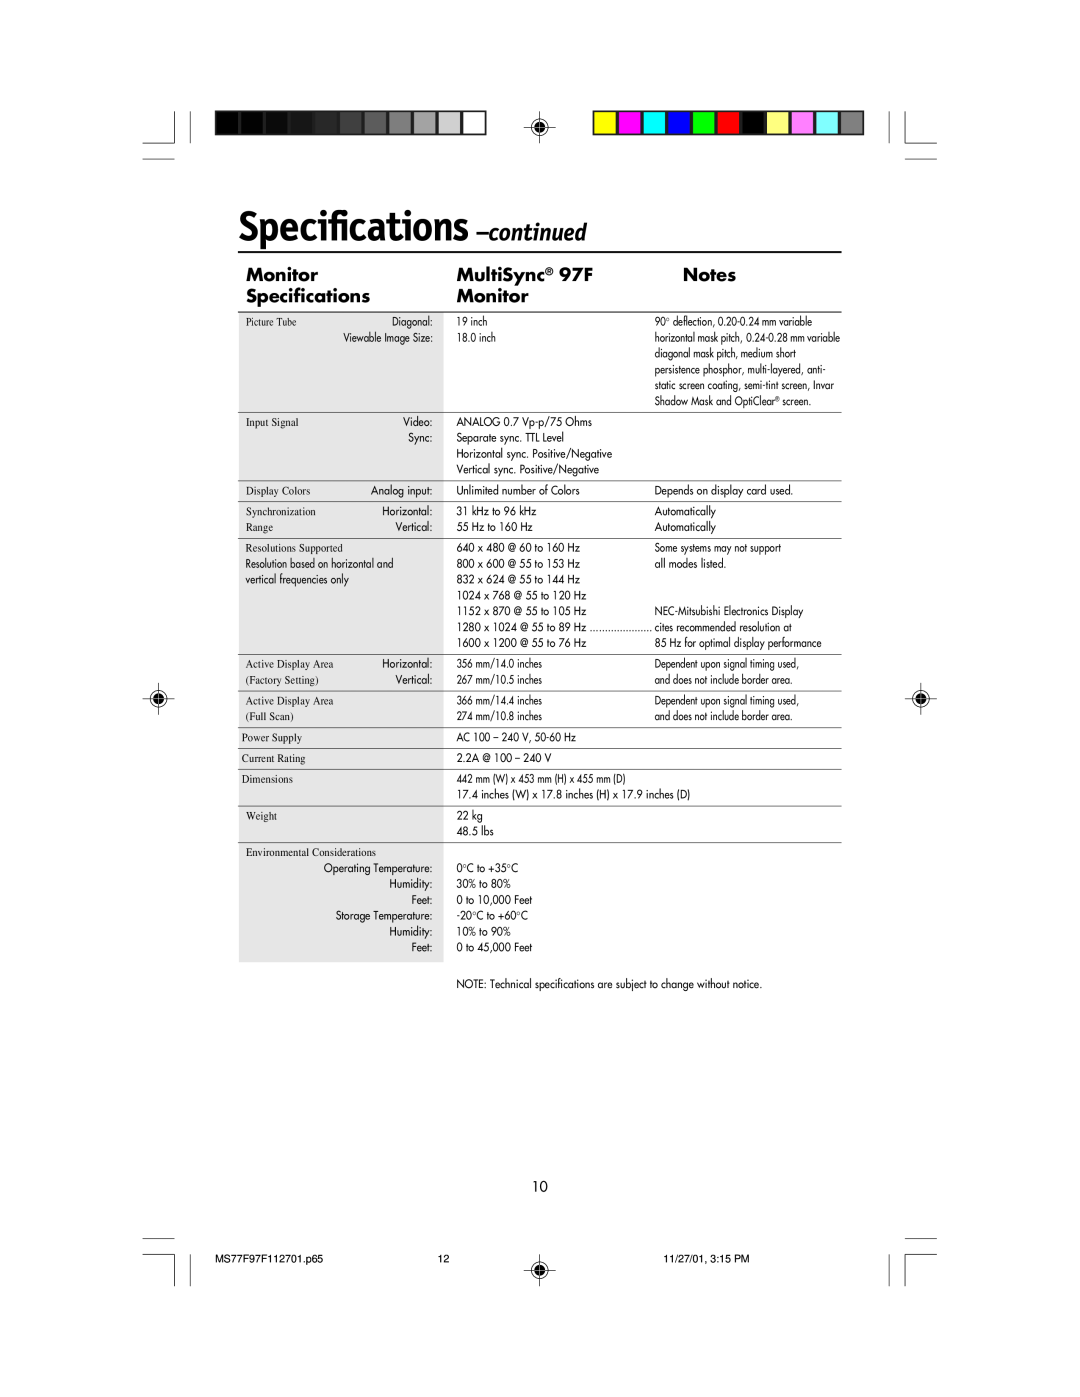 NEC 77F manual Specifications -continued, MultiSync 97F, Monitor 